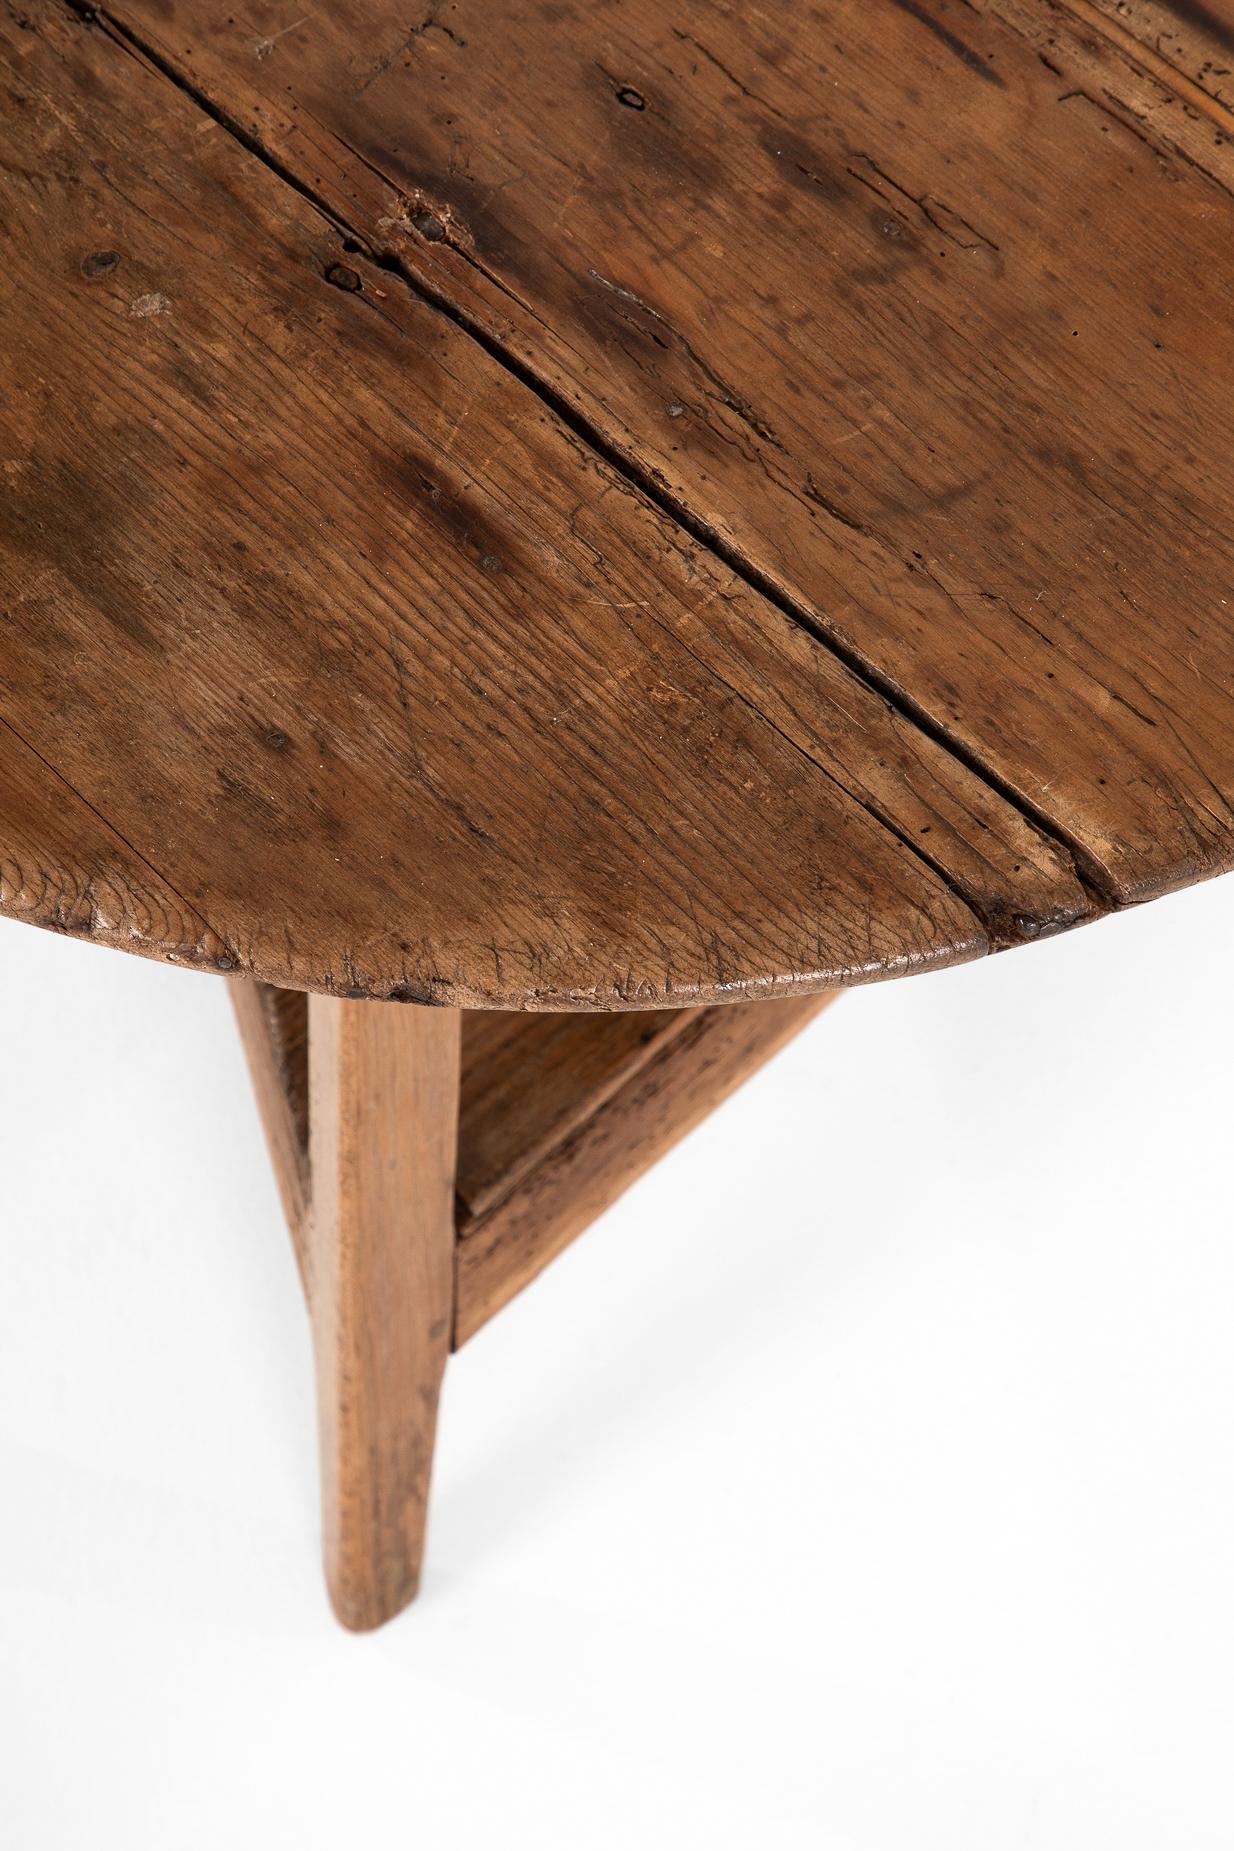 Hand-Crafted 18th Century Cricket Table